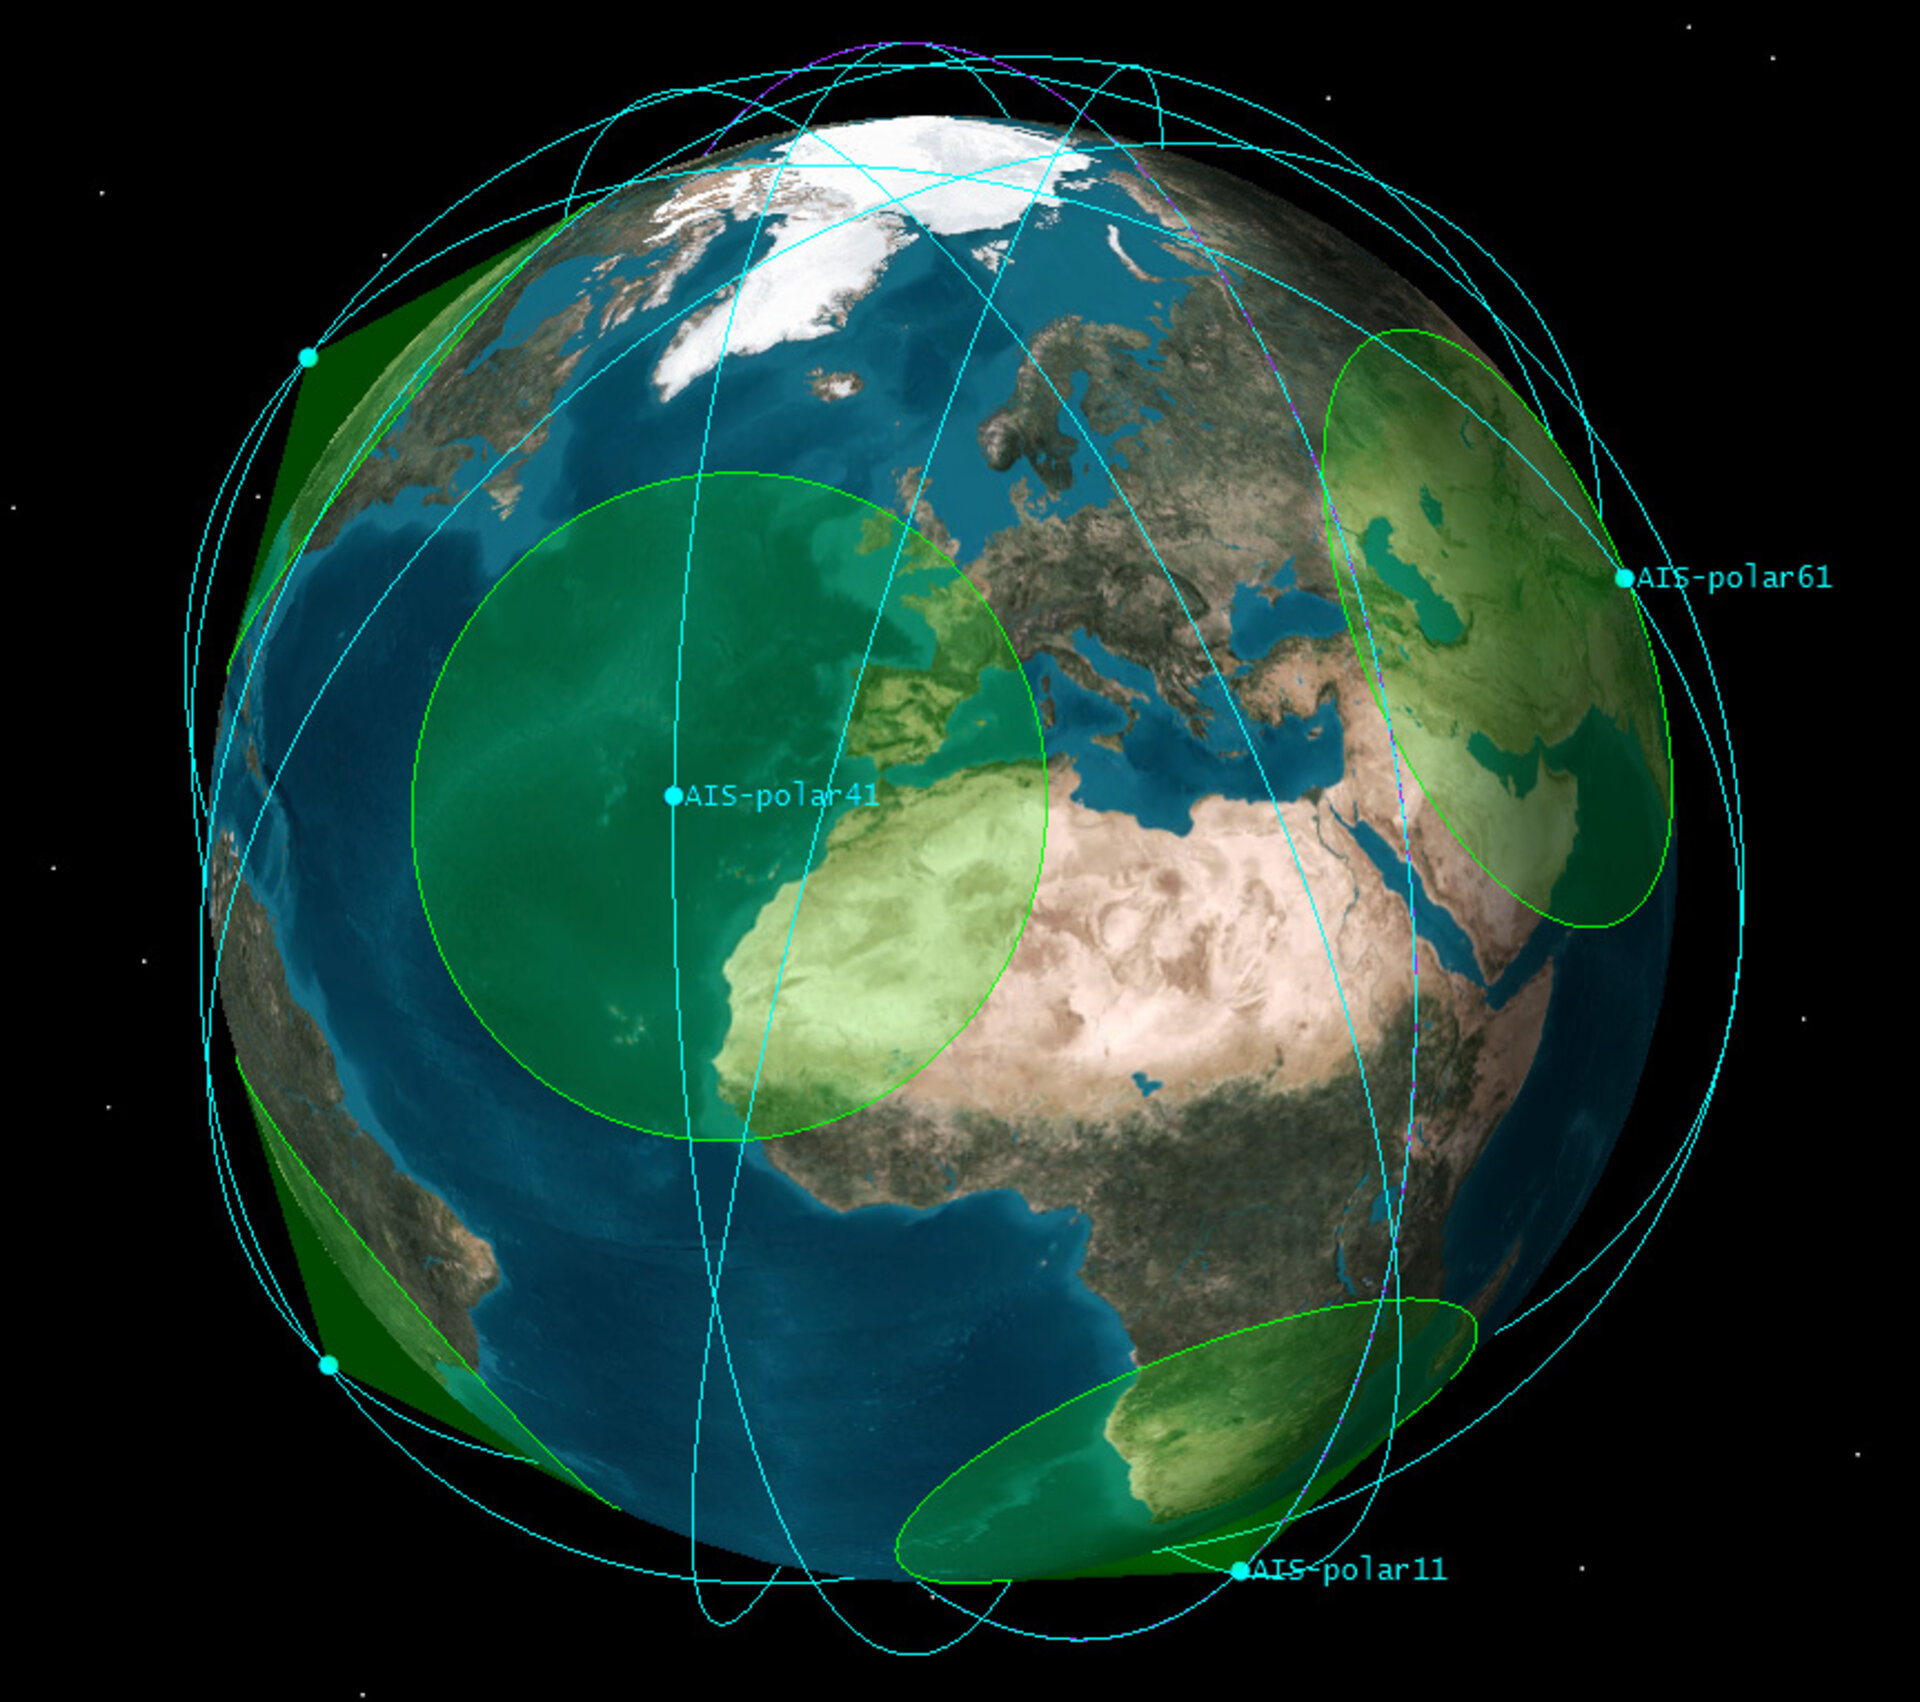 AIS signal detection from space